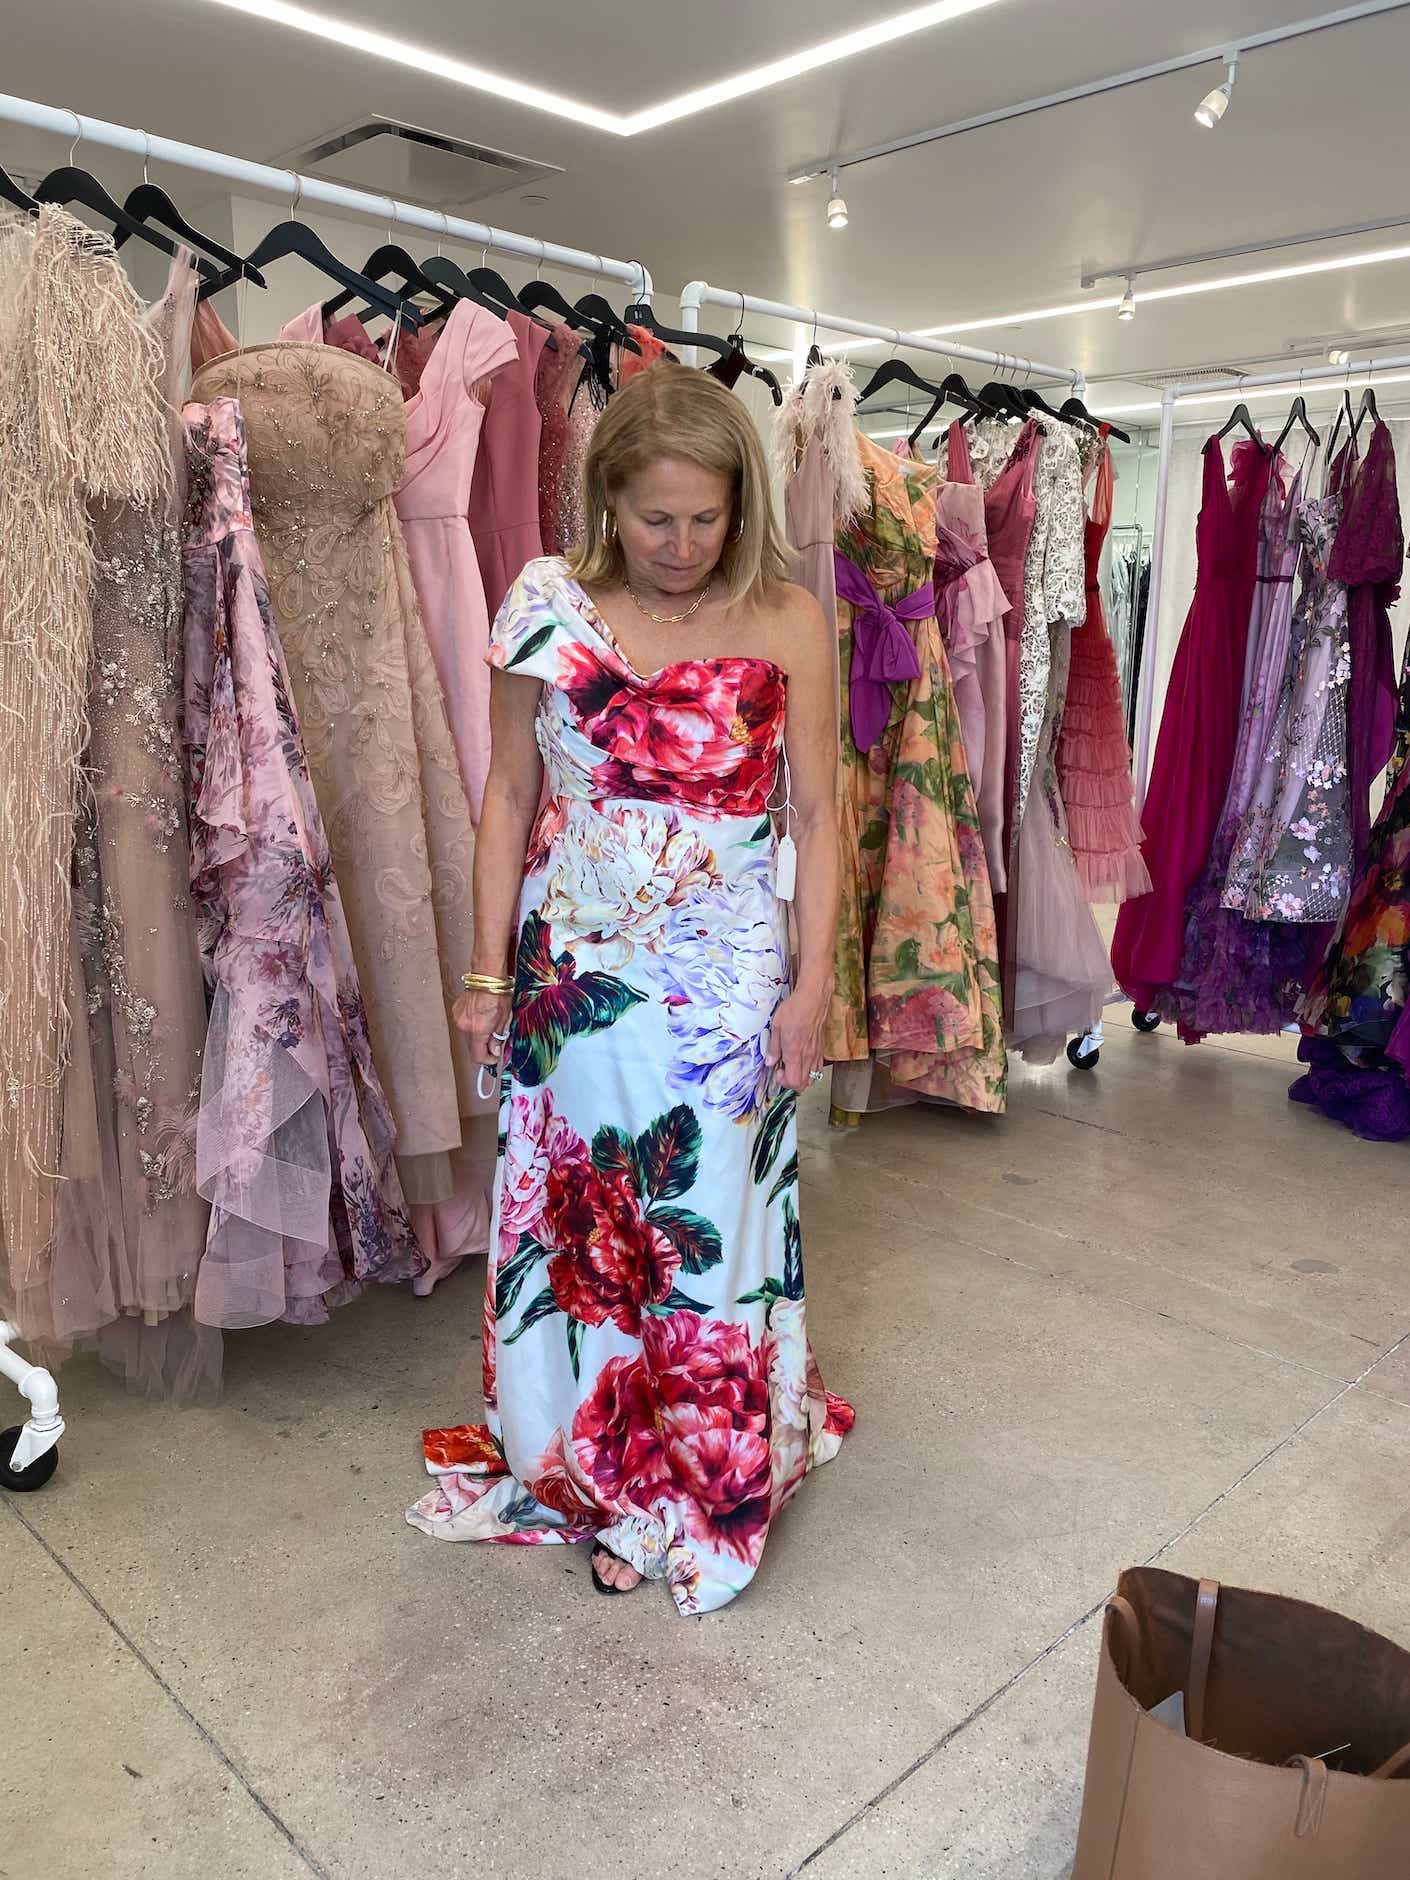 Katie Couric trying on a gown with large pink flowers